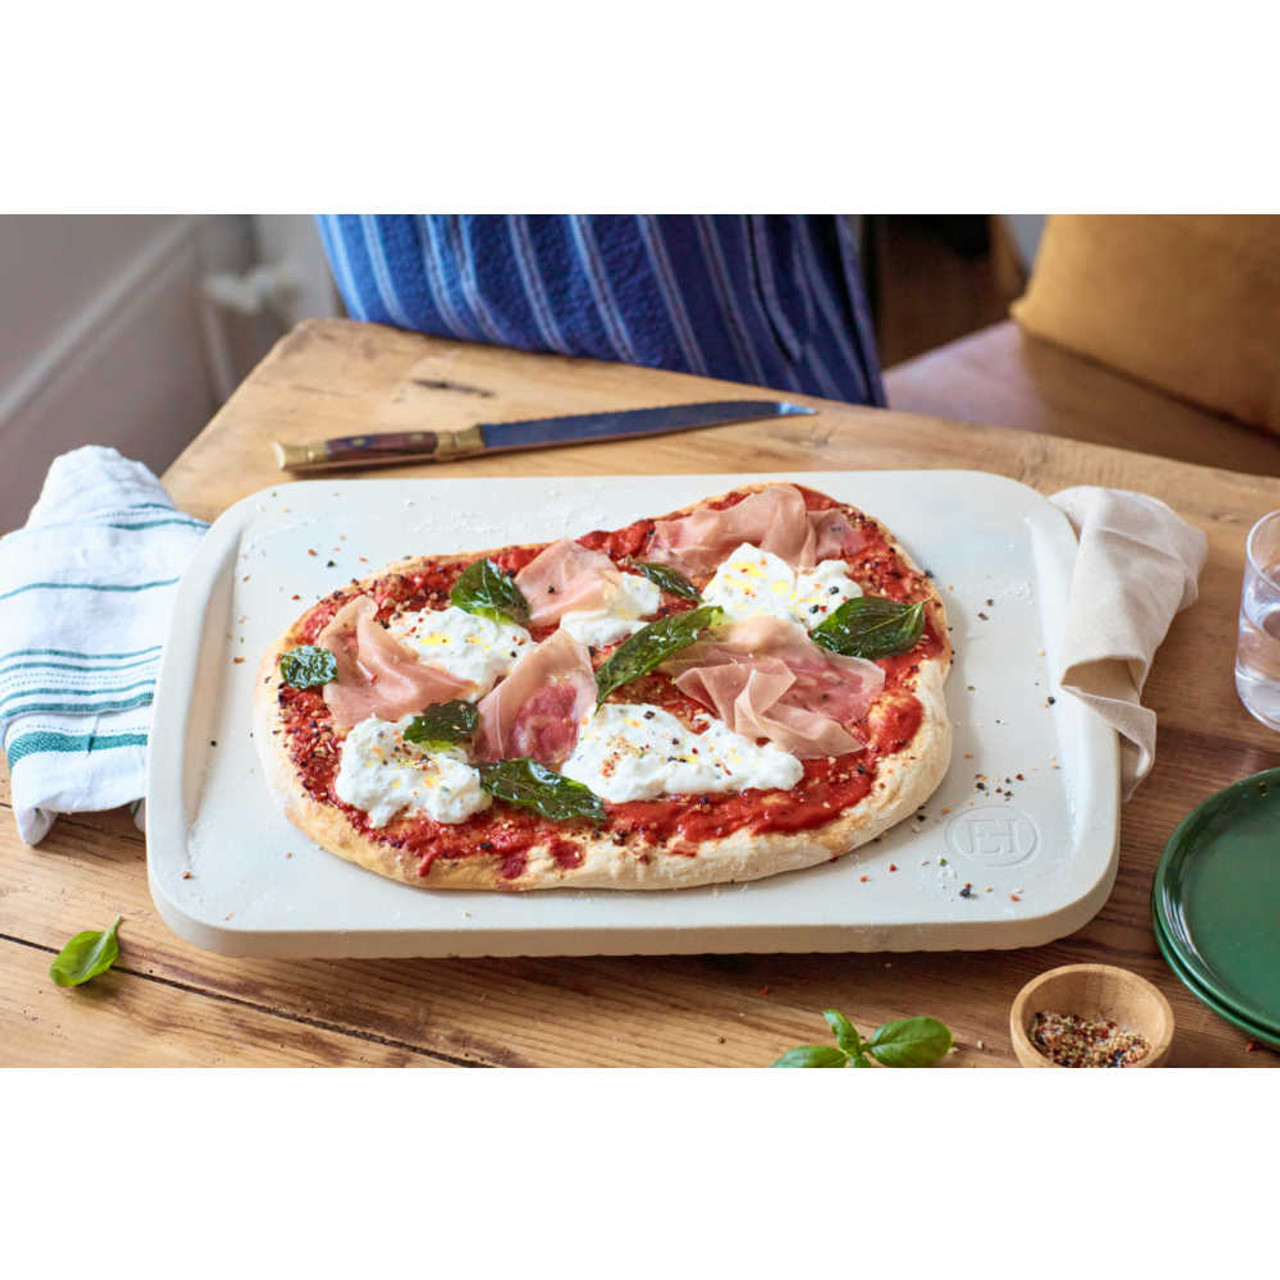 https://cdn11.bigcommerce.com/s-hccytny0od/images/stencil/1280x1280/products/5670/24695/Emile_Henry_Maestro_Pizza_Stone_2__54032.1695340751.jpg?c=2?imbypass=on